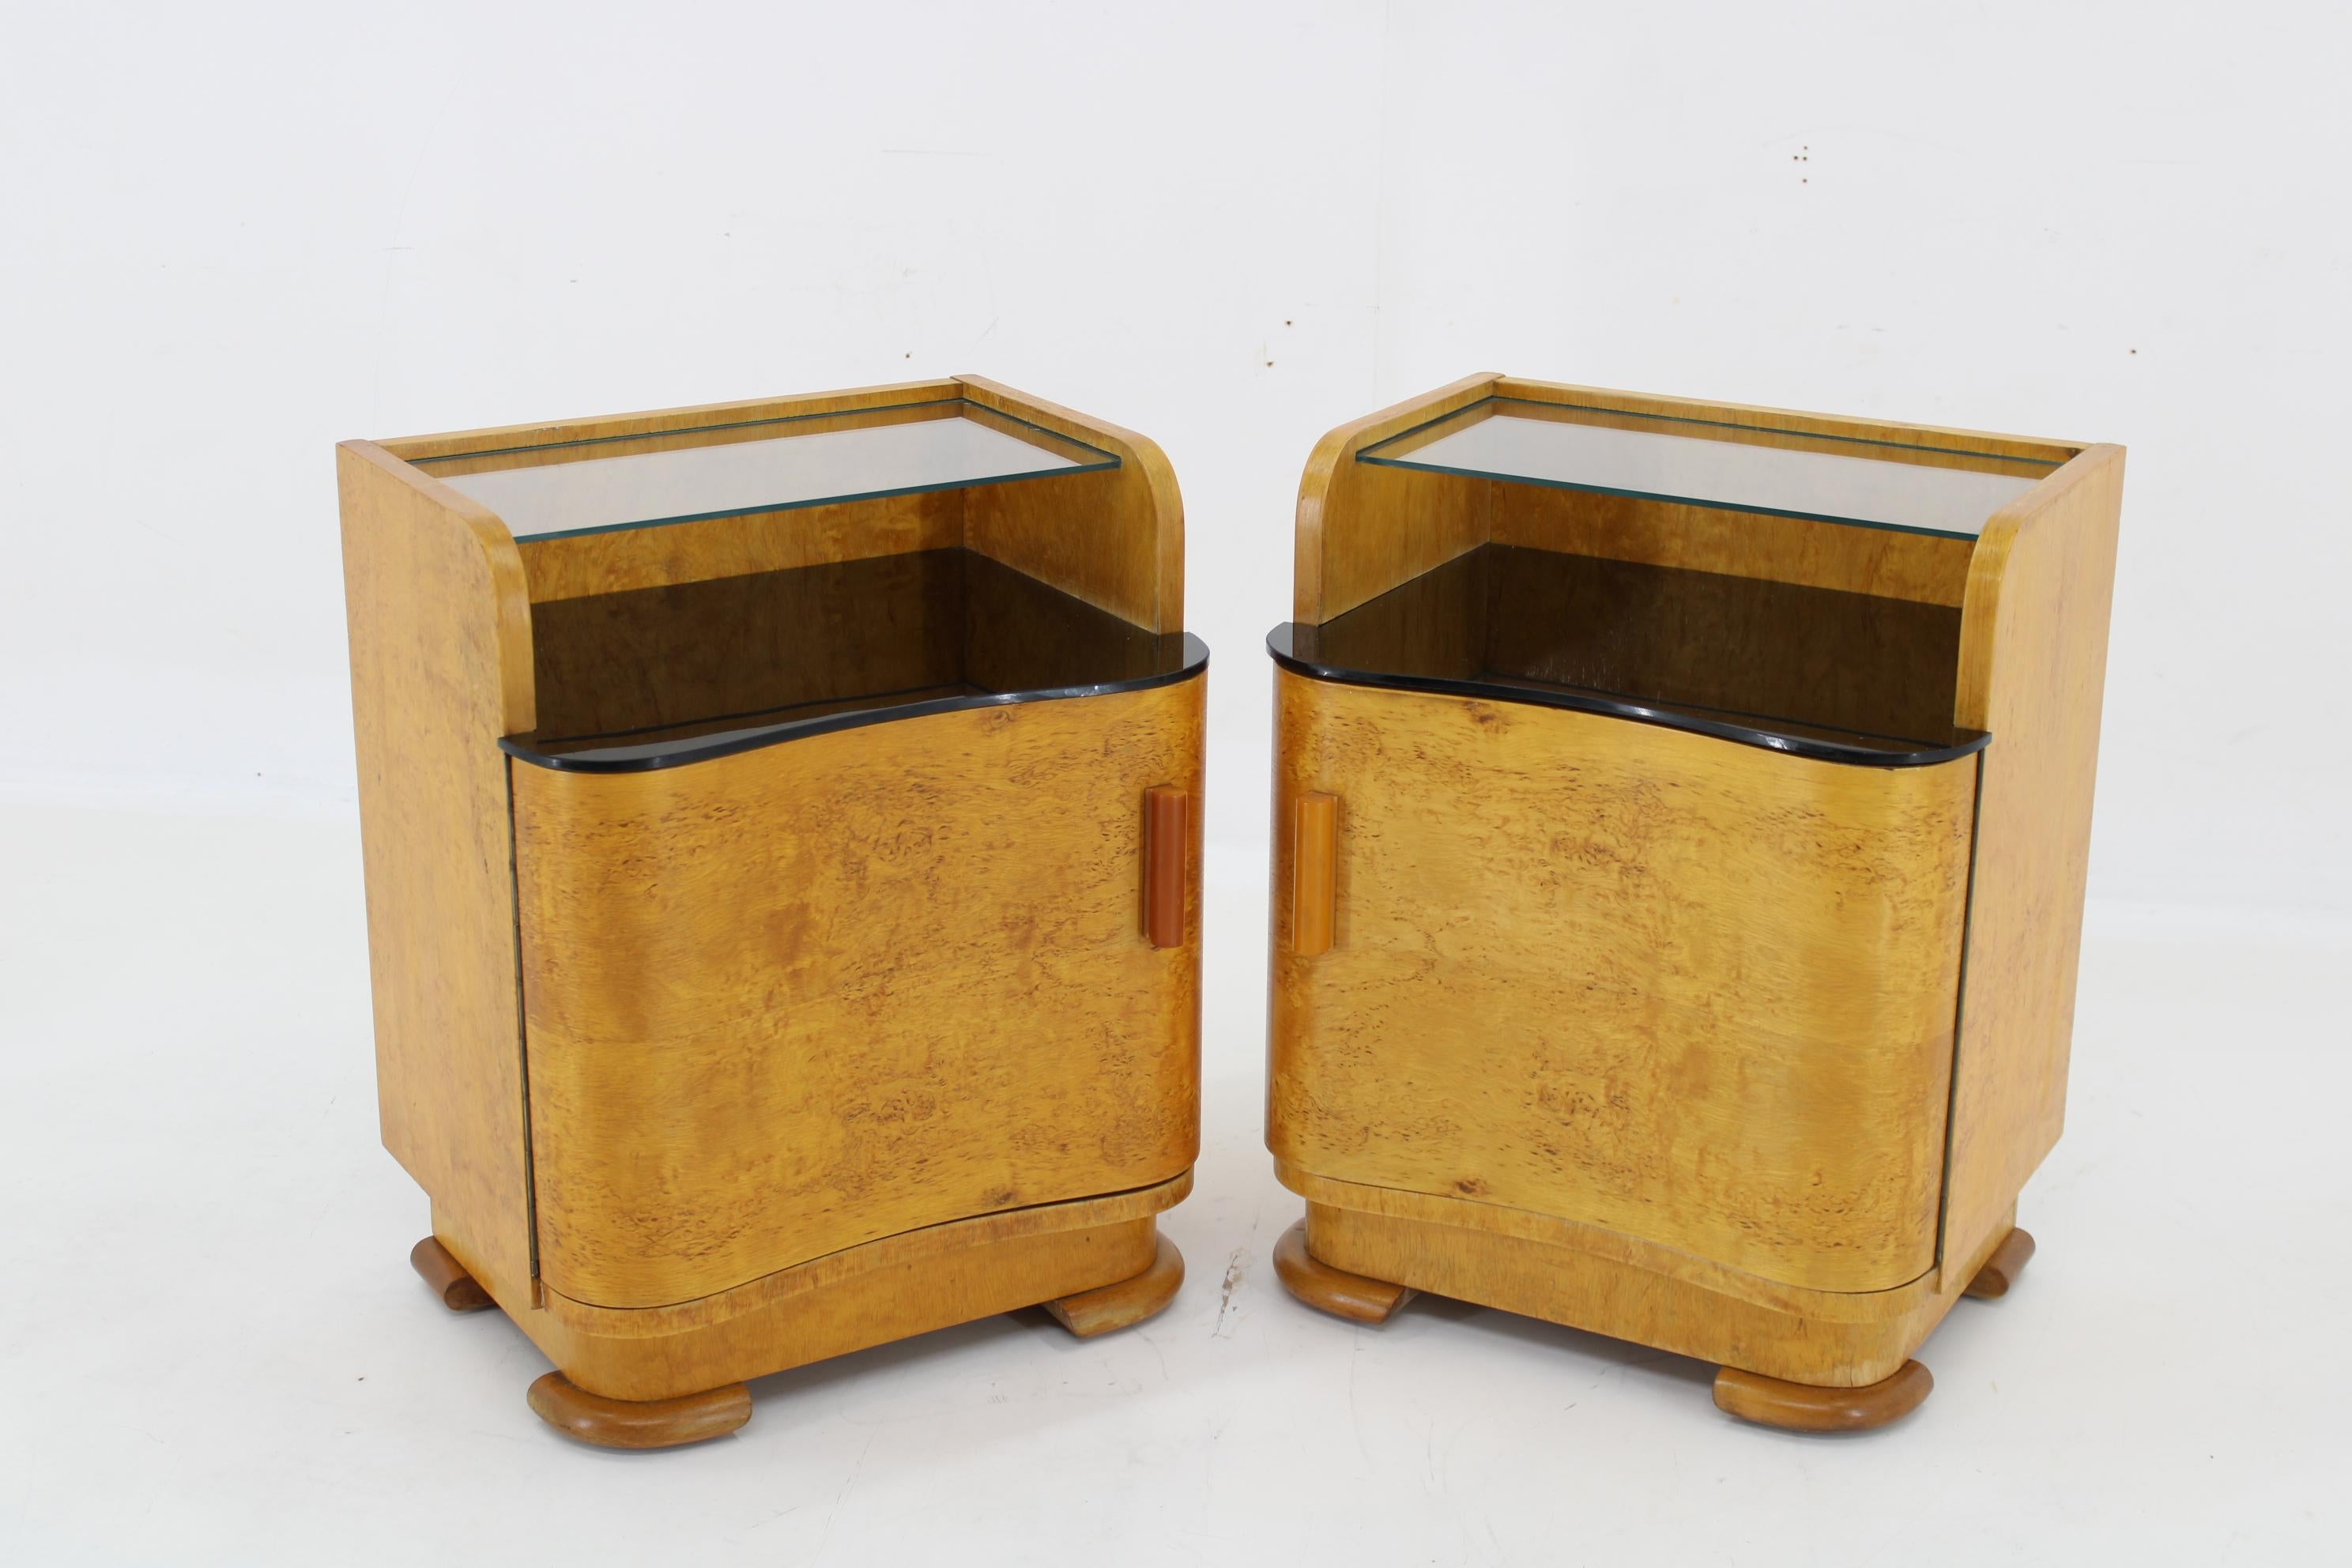 Wood 1950s Pair of Bedside Tables in Maple Finish, Czechoslovakia